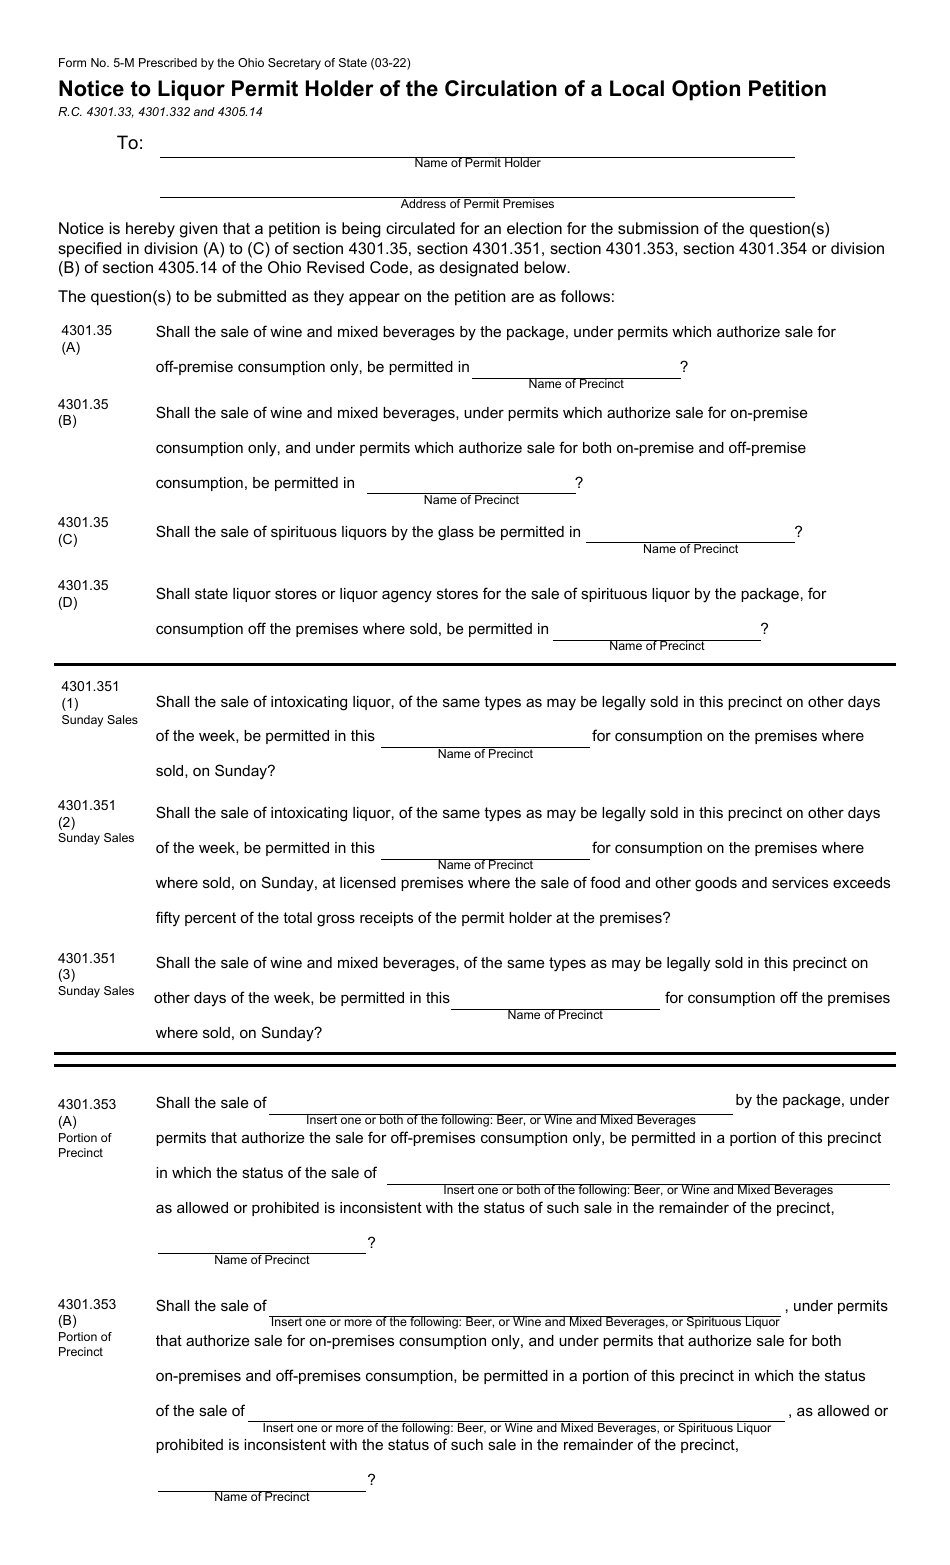 Form 5-M Notice to Liquor Permit Holder of the Circulation of a Local Option Petition - Ohio, Page 1